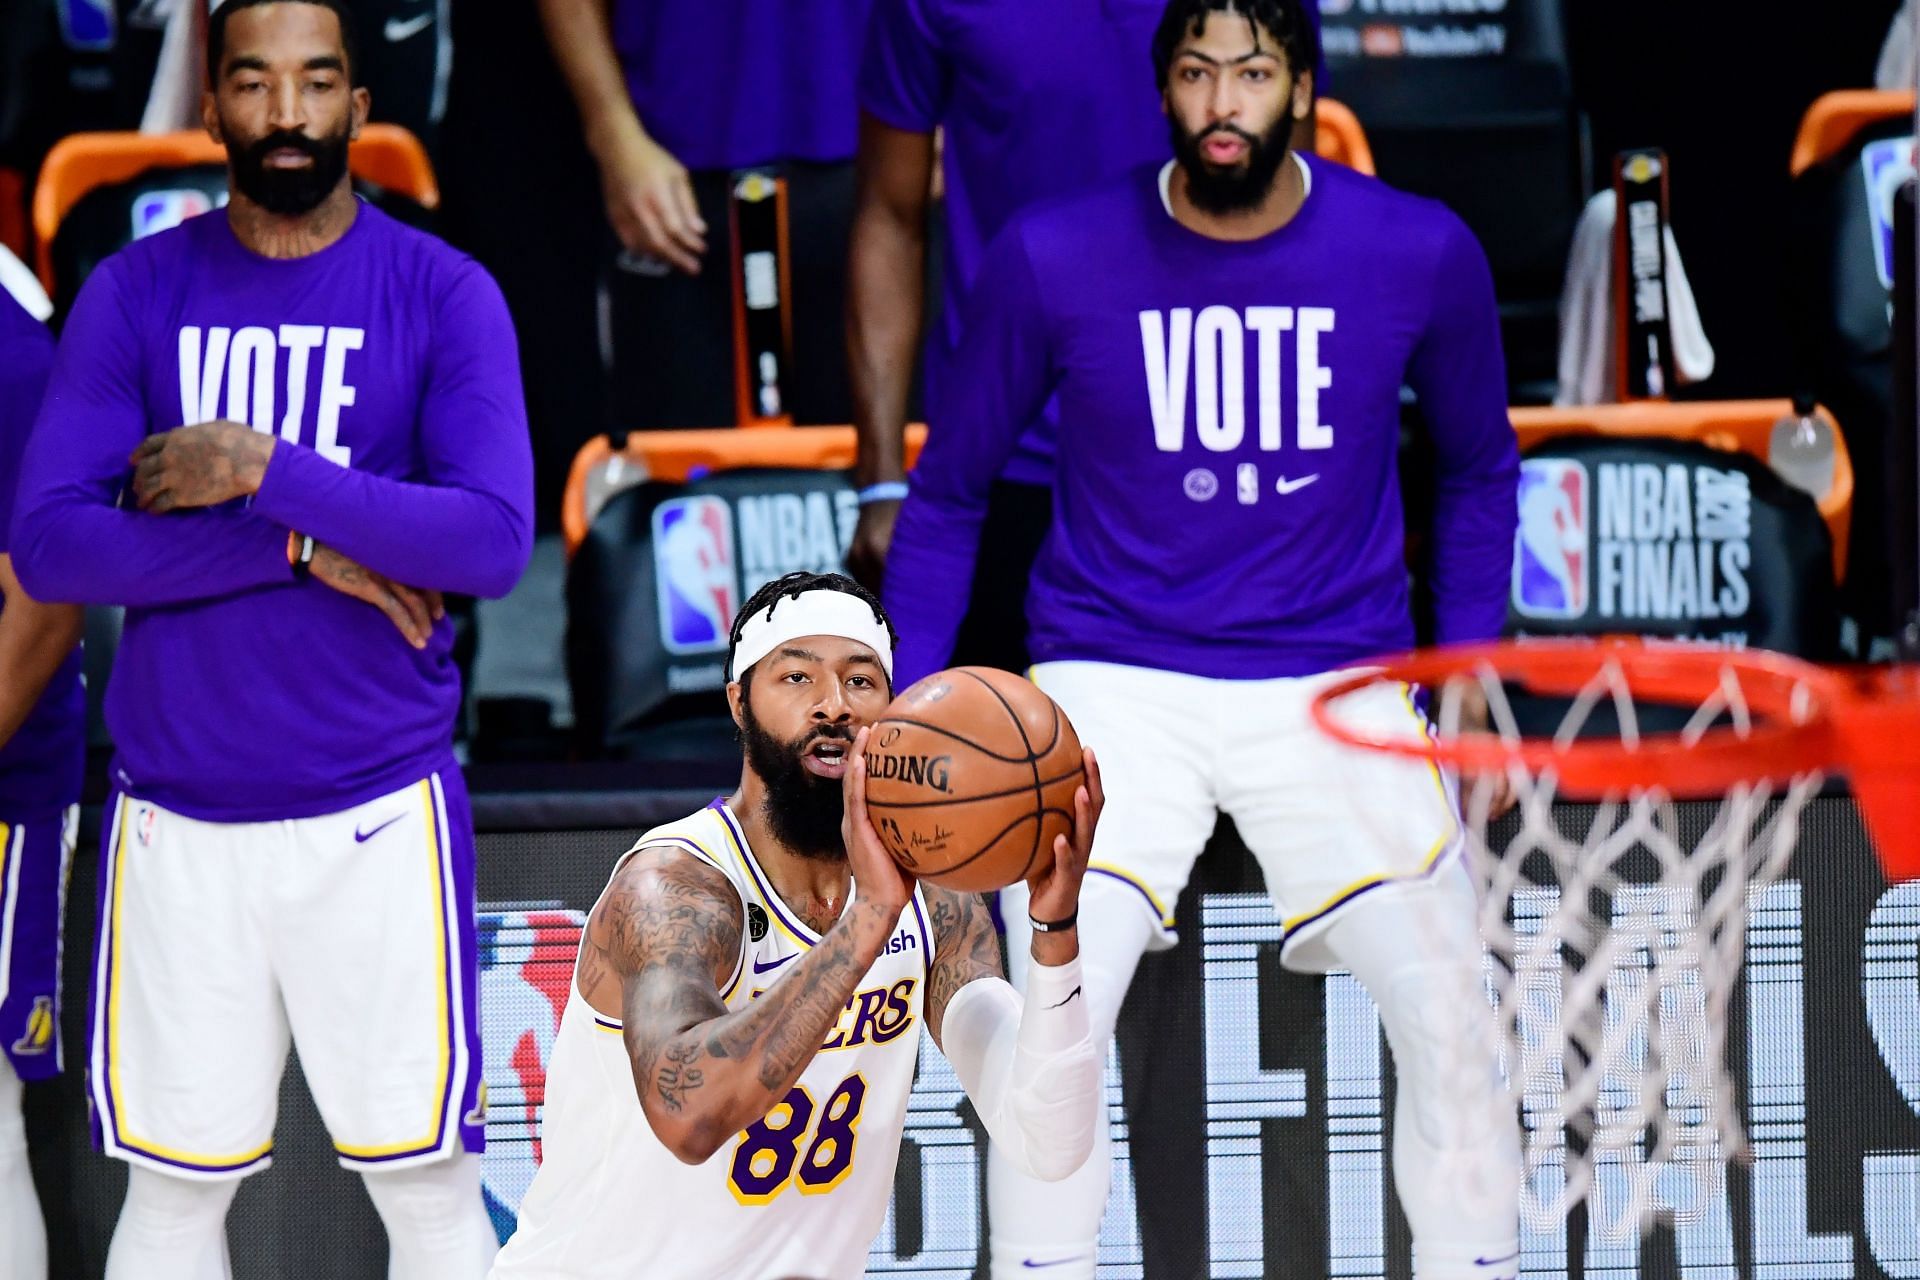 Markieff Morris #88 of the Los Angeles Lakers shoots a three point basket during the second quarter against the Miami Heat in Game Six of the 2020 NBA Finals at AdventHealth Arena at the ESPN Wide World Of Sports Complex on October 11, 2020 in Lake Buena Vista, Florida.